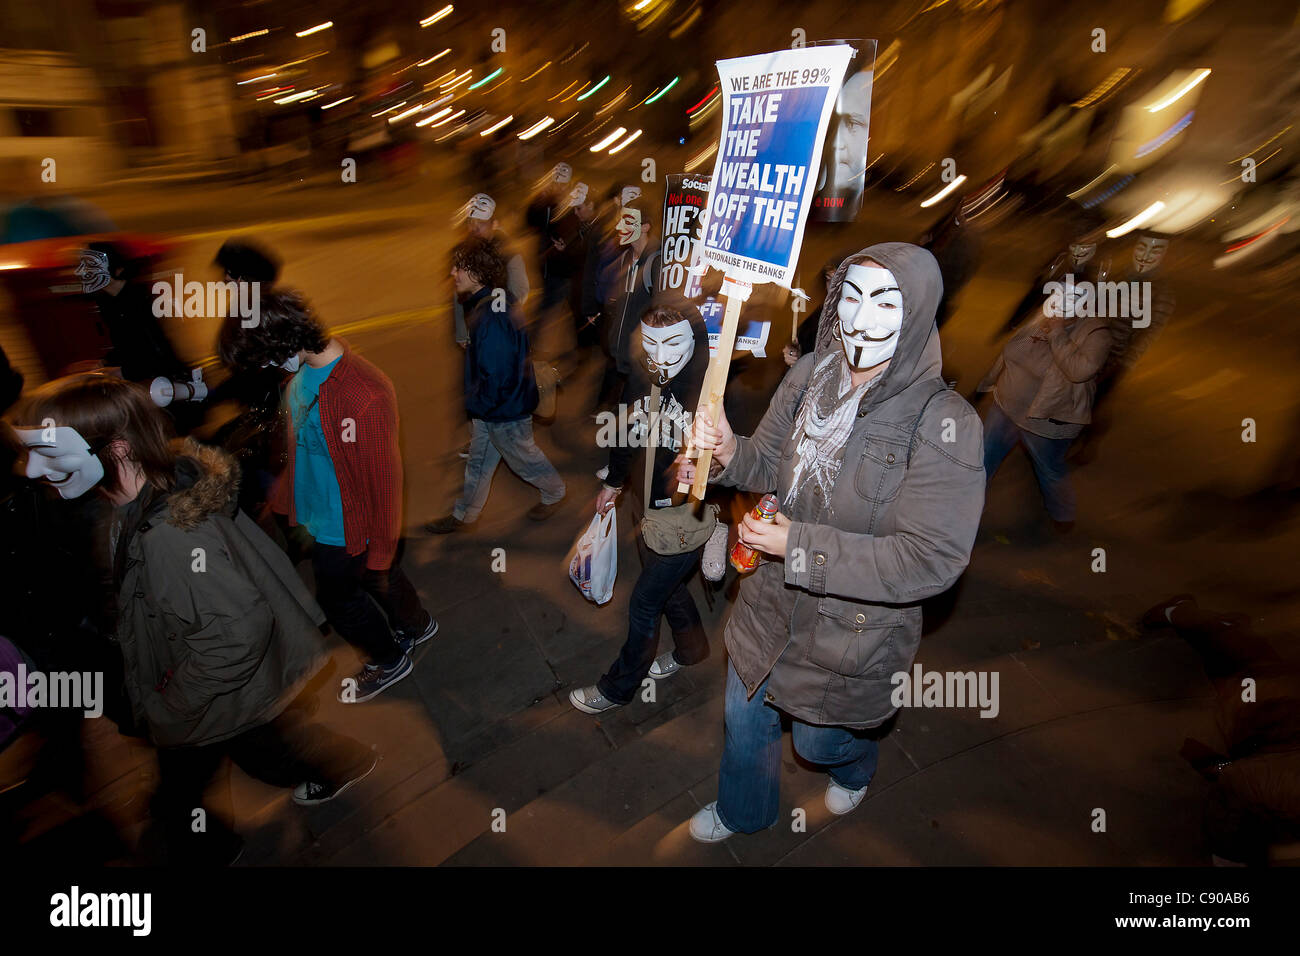 Followers of Anonymous UK arrive in Trafalgar Square sporting V for Vendetta masks. They dance and then march across the square Stock Photo